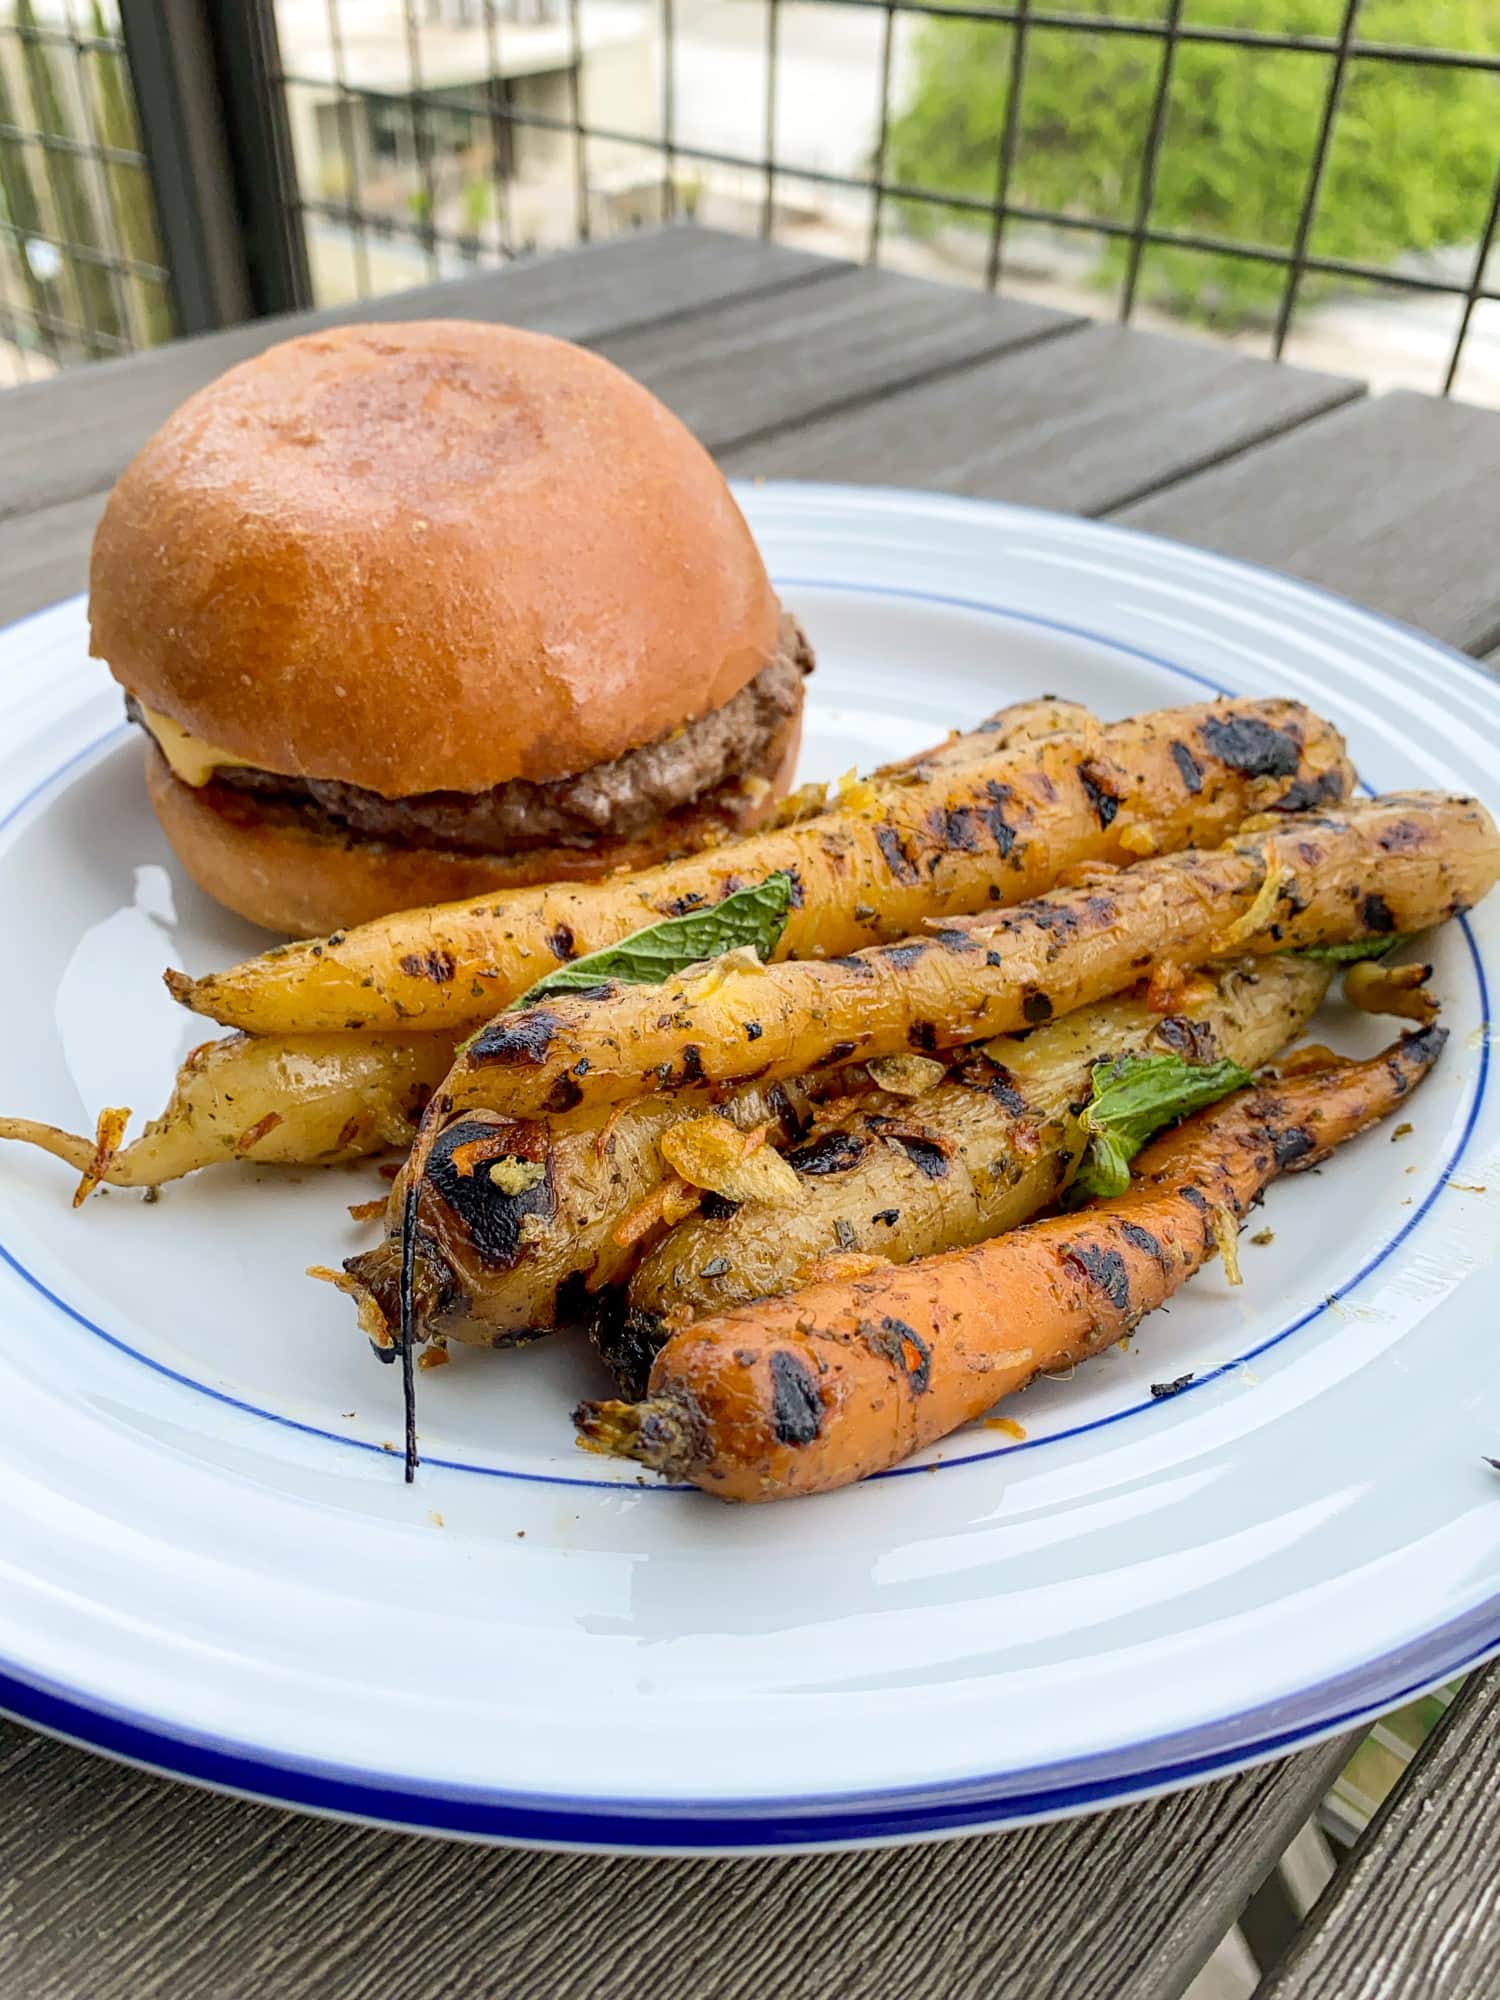 Plancha burger with roasted carrots from Launderette